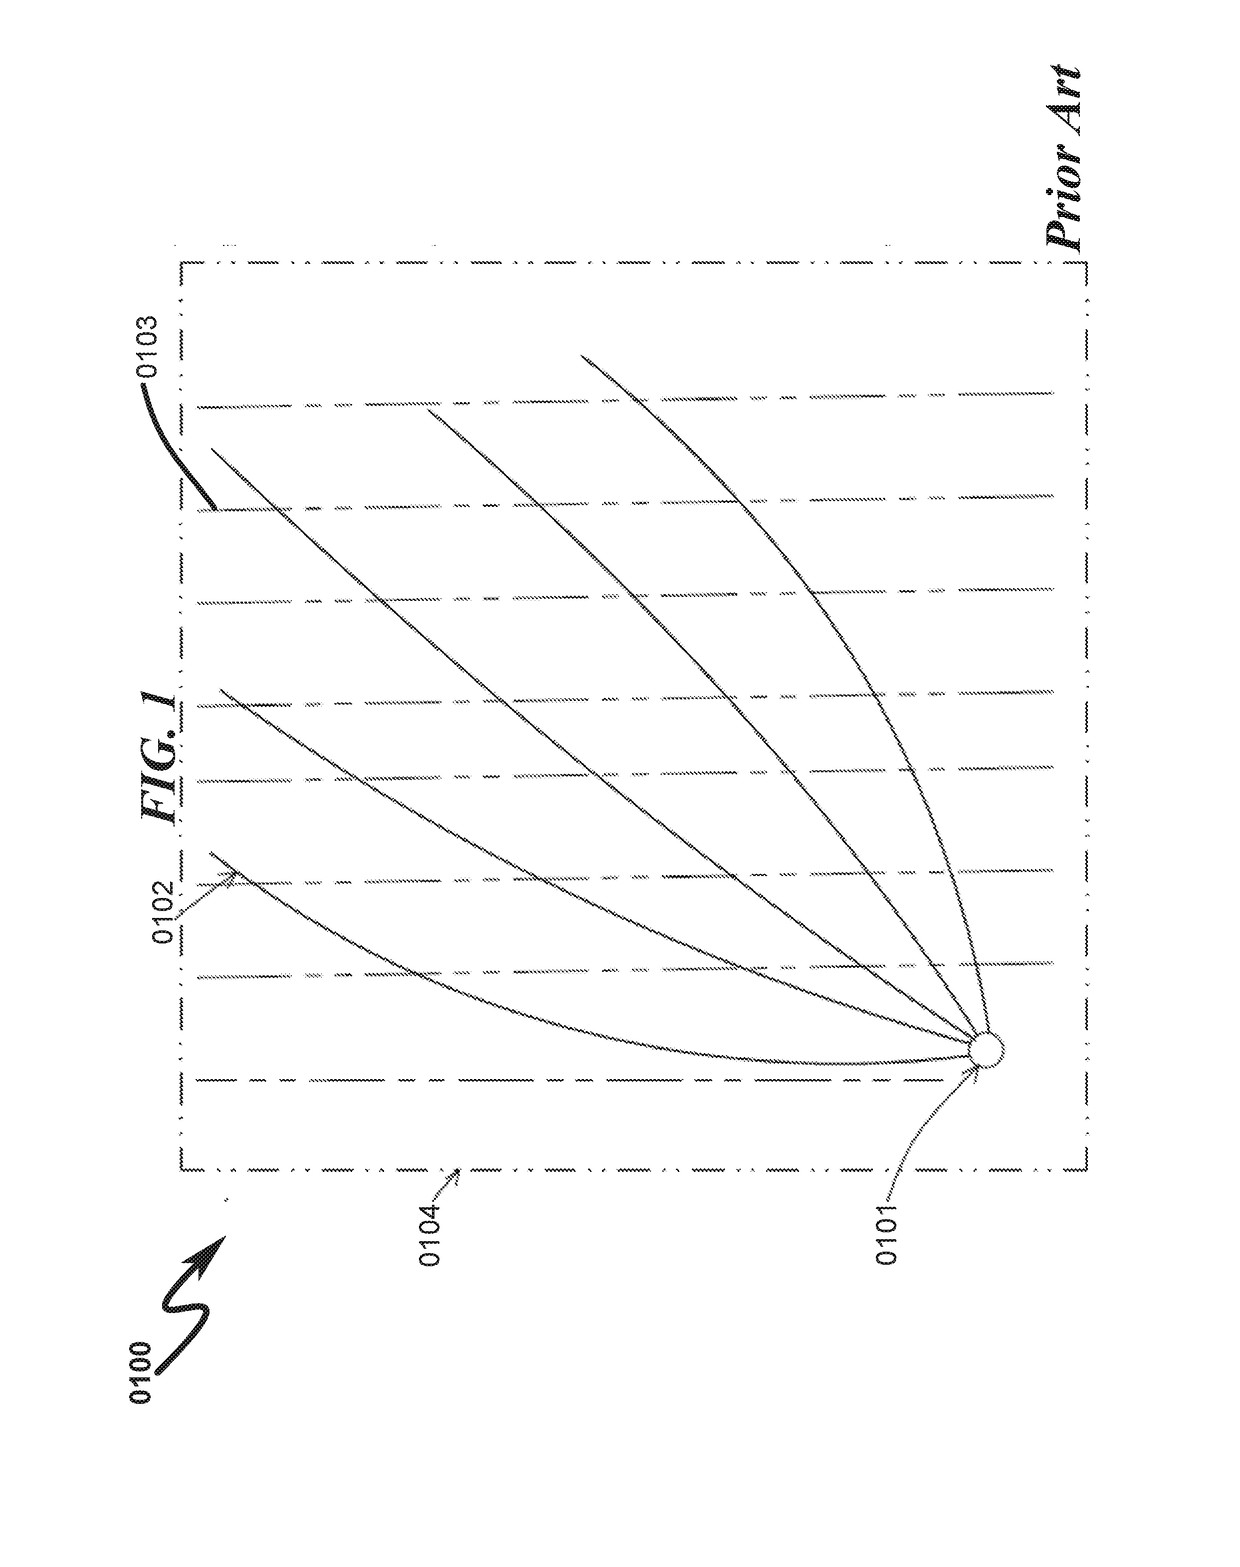 Optimal phasing of charges in a perforating system and method